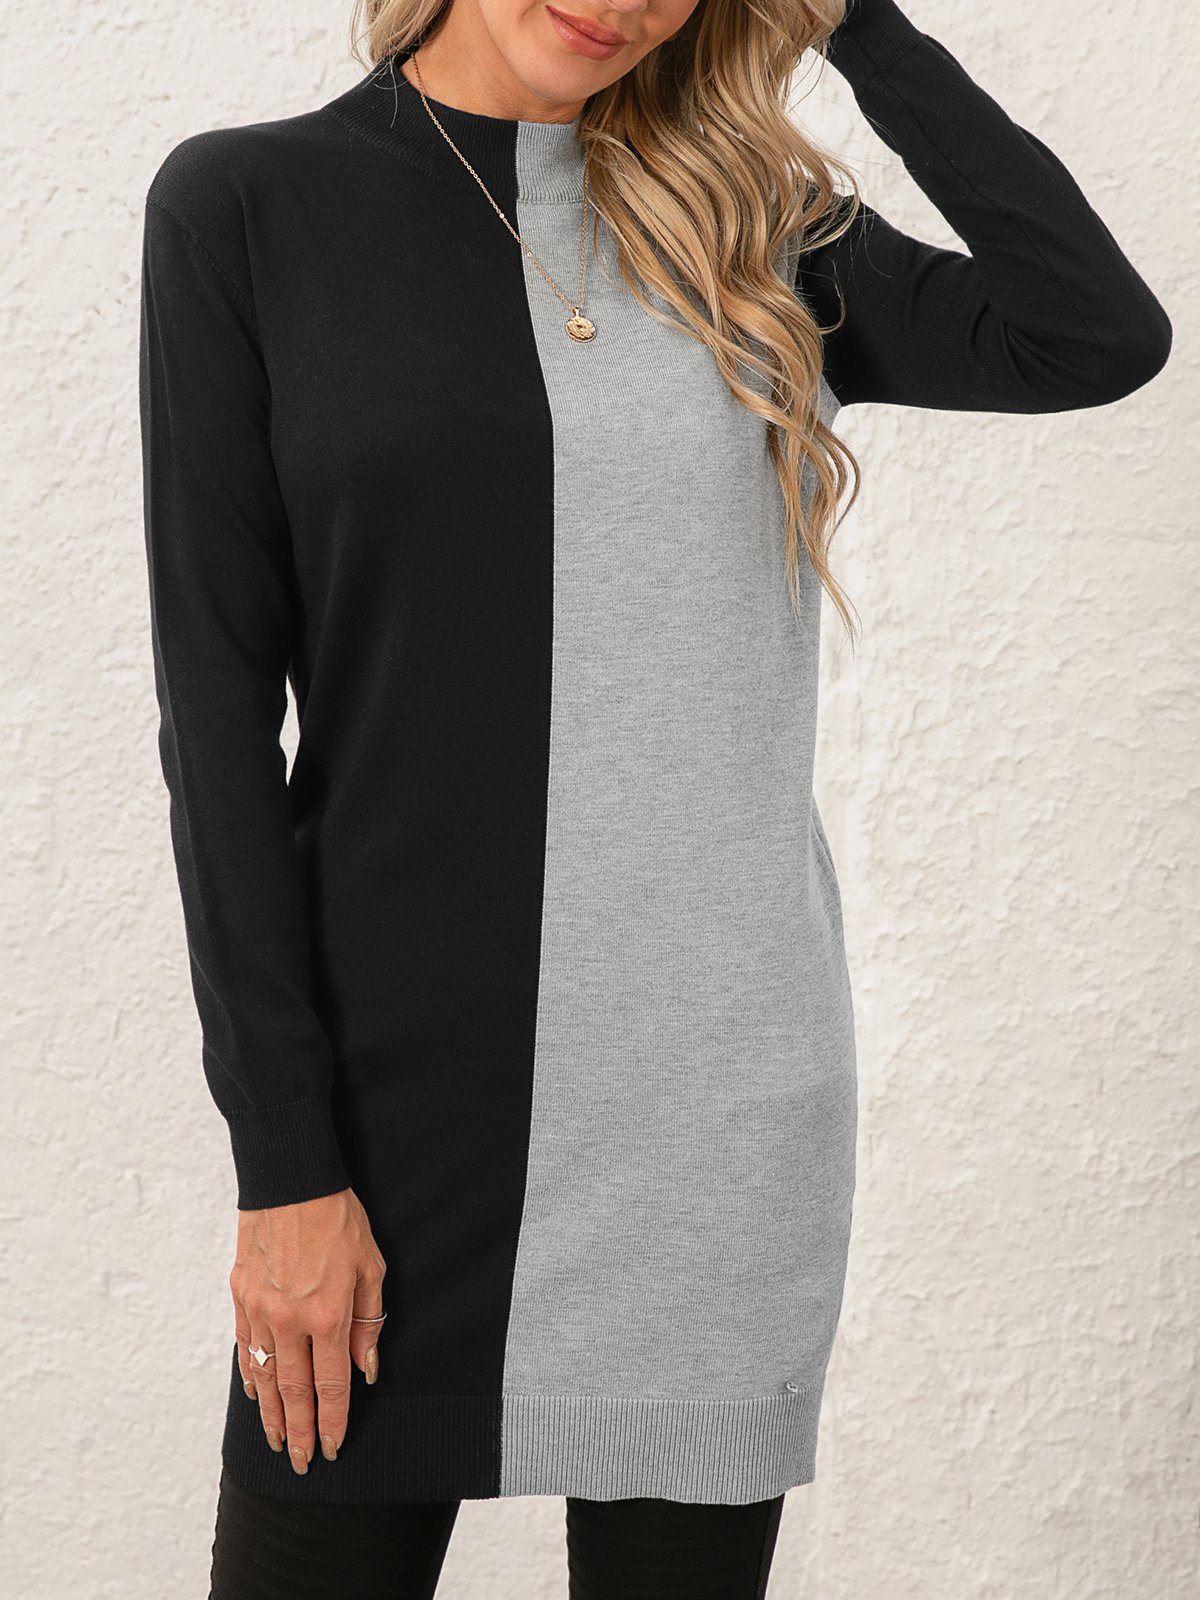 Simple Viscose Micro-Elasticity Daily Fit Crew Neck Long Sweater for Women